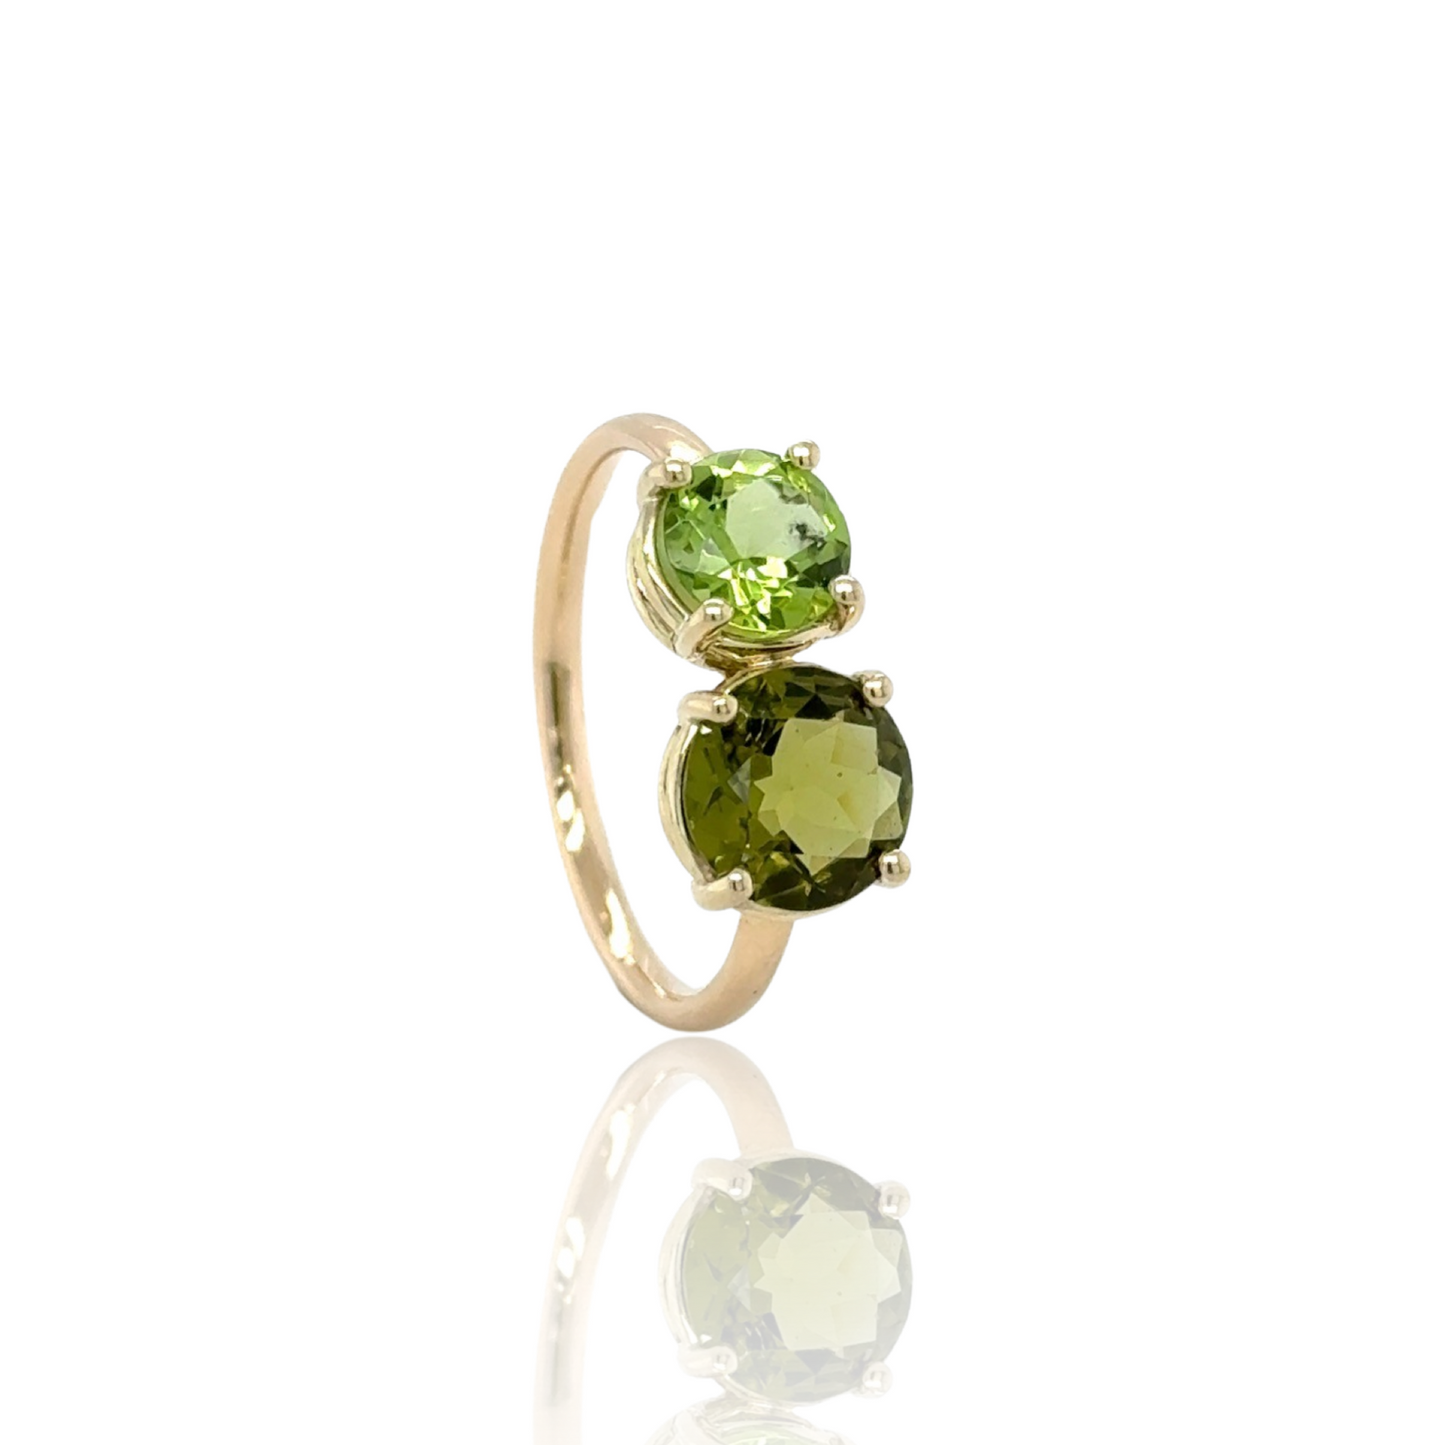 Toi et Moi ring in yellowgold with Green Tourmaline and Peridot